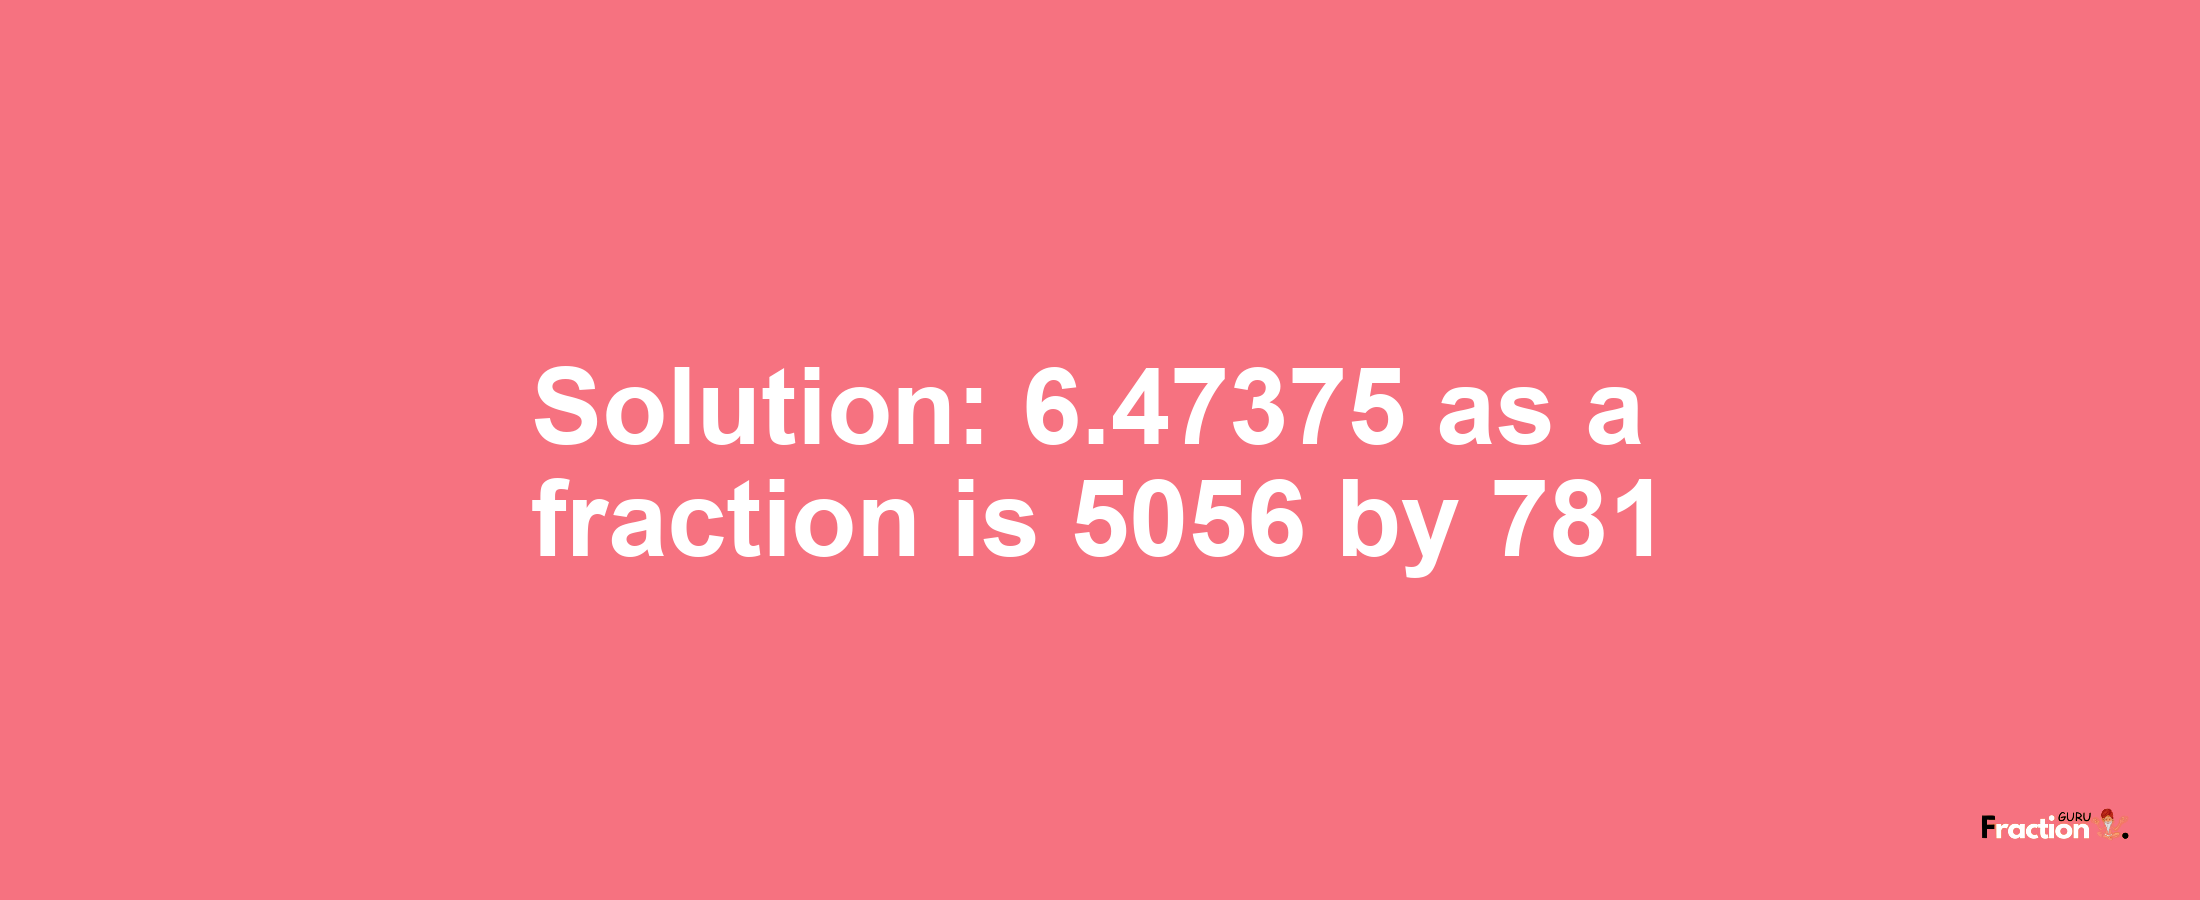 Solution:6.47375 as a fraction is 5056/781